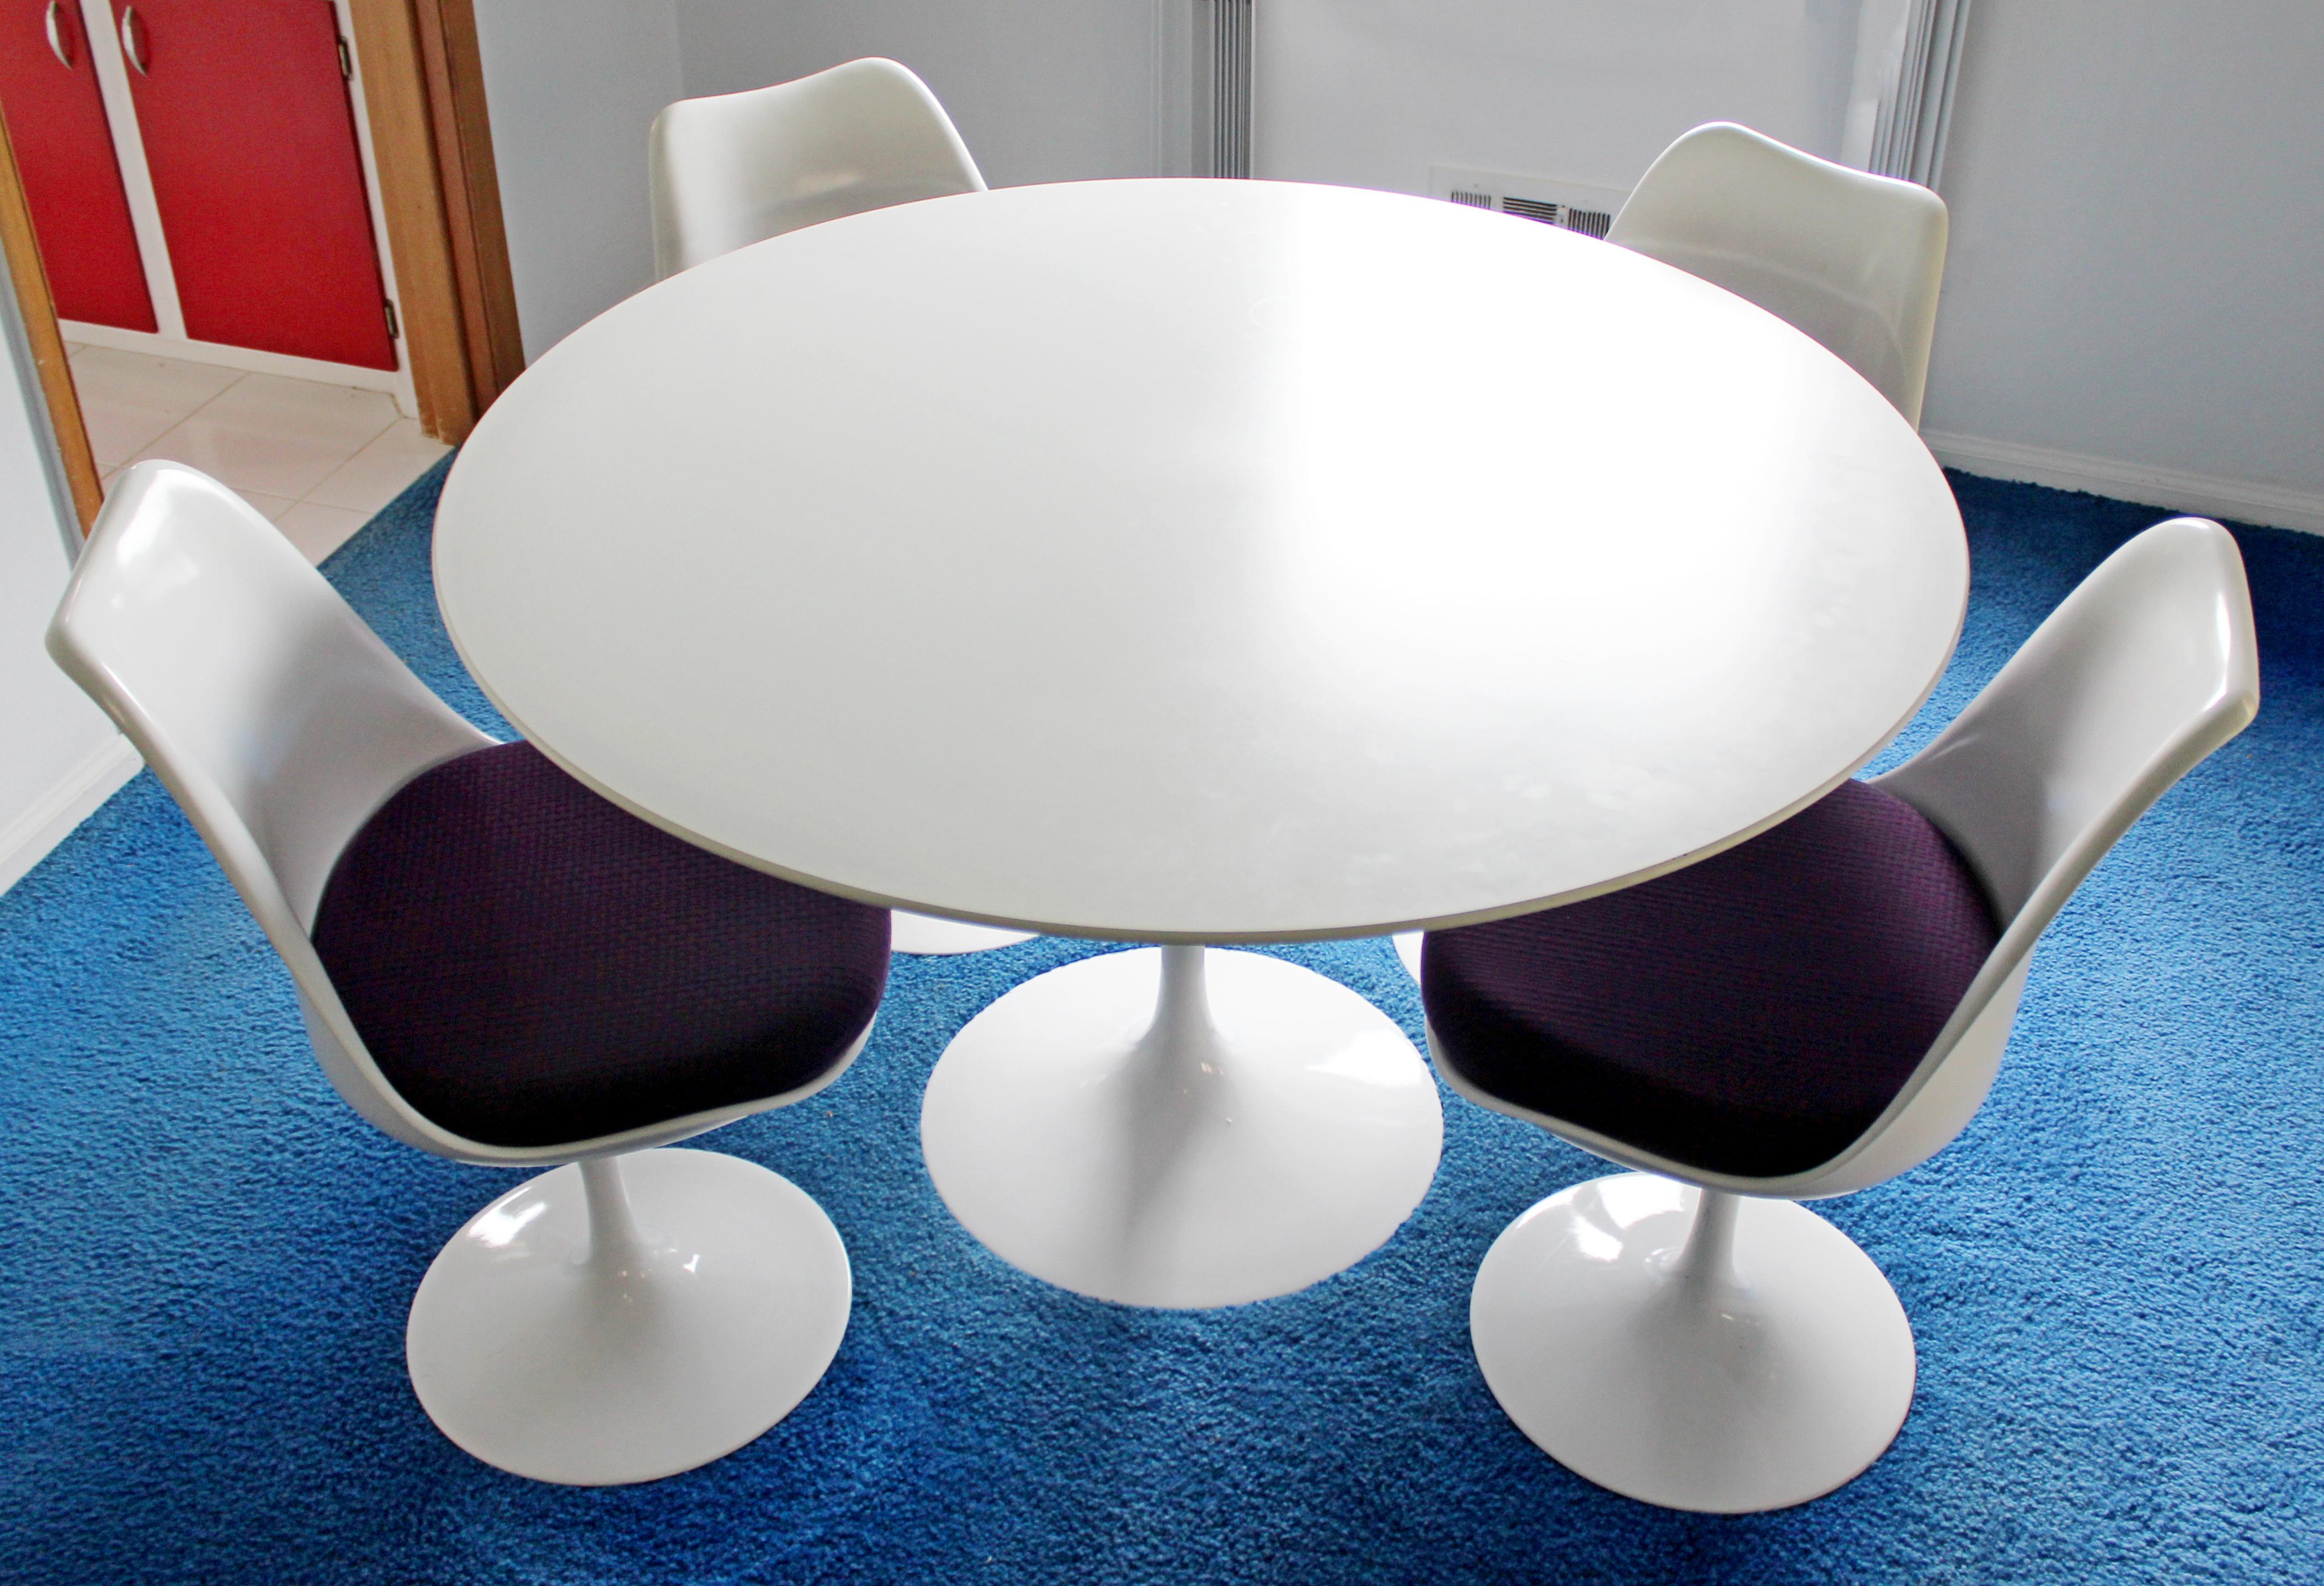 For your consideration is a stunning, tulip style dining set, with table and four chairs, in the style of Saarinen for Knoll, circa the 1960s, made in Italy. In excellent vintage condition. The dimensions of the table are 45